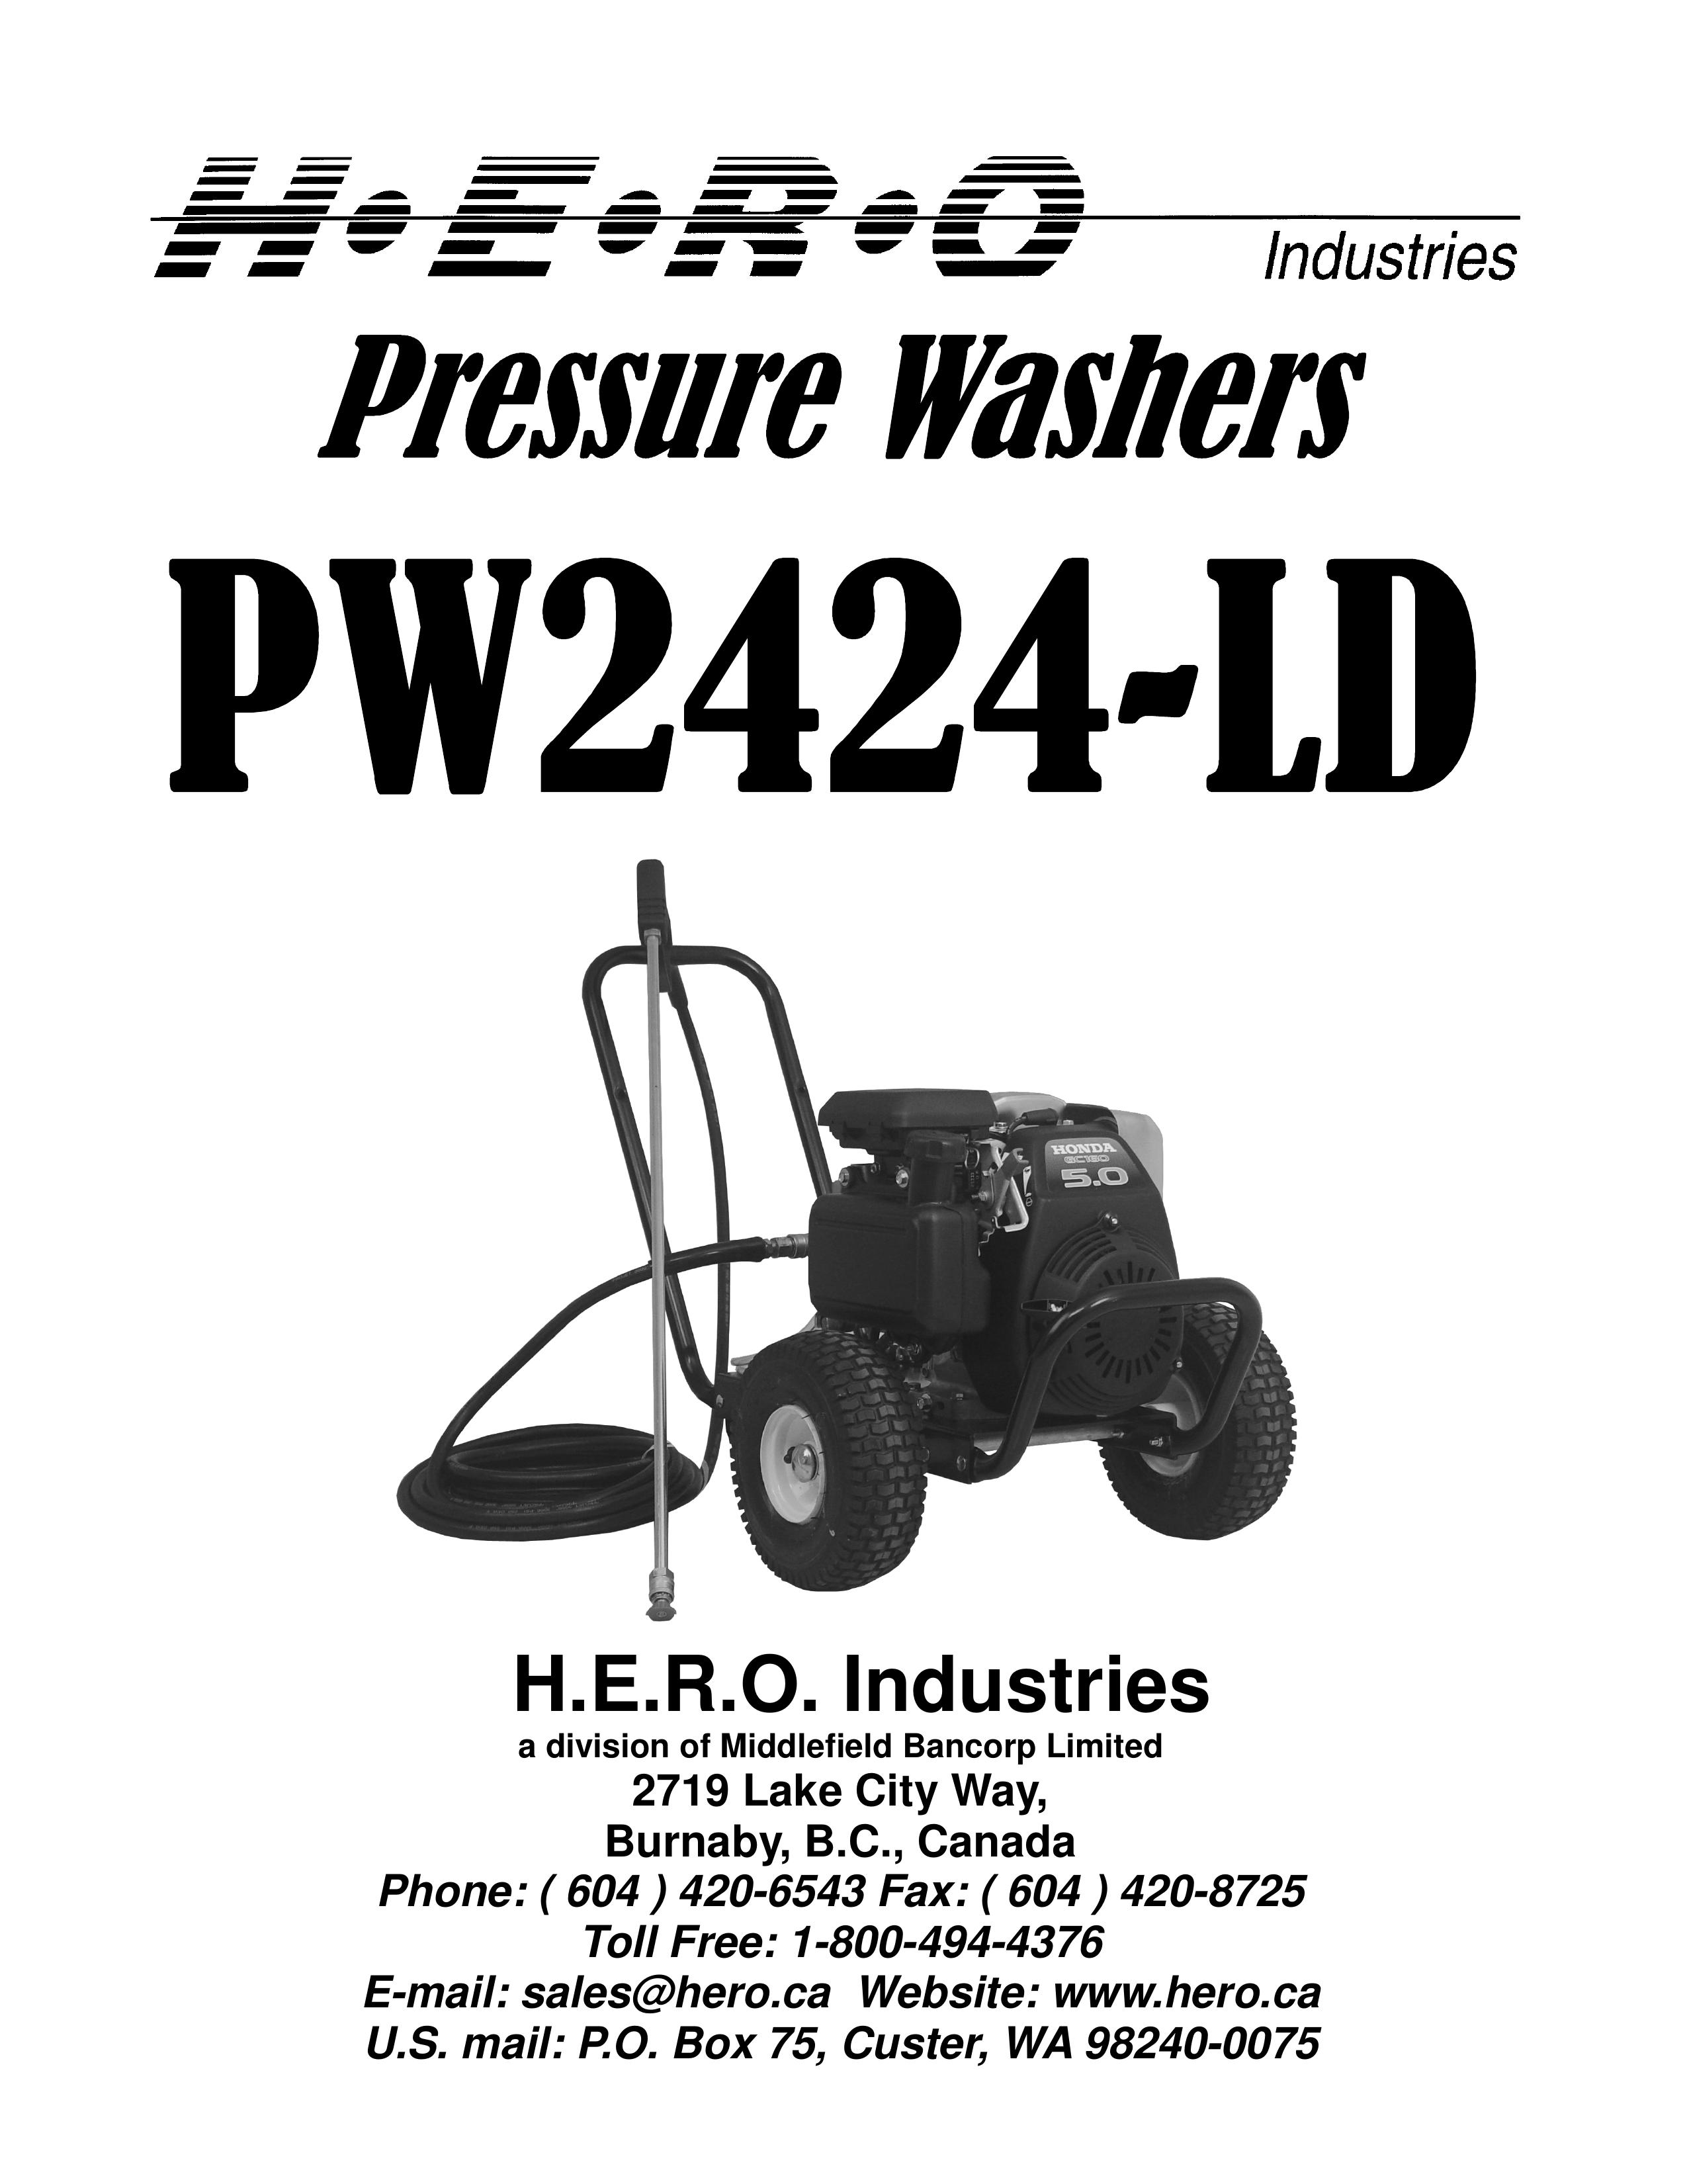 I.C.T.C. Holdings Corporation PW2424-LD Pressure Washer User Manual